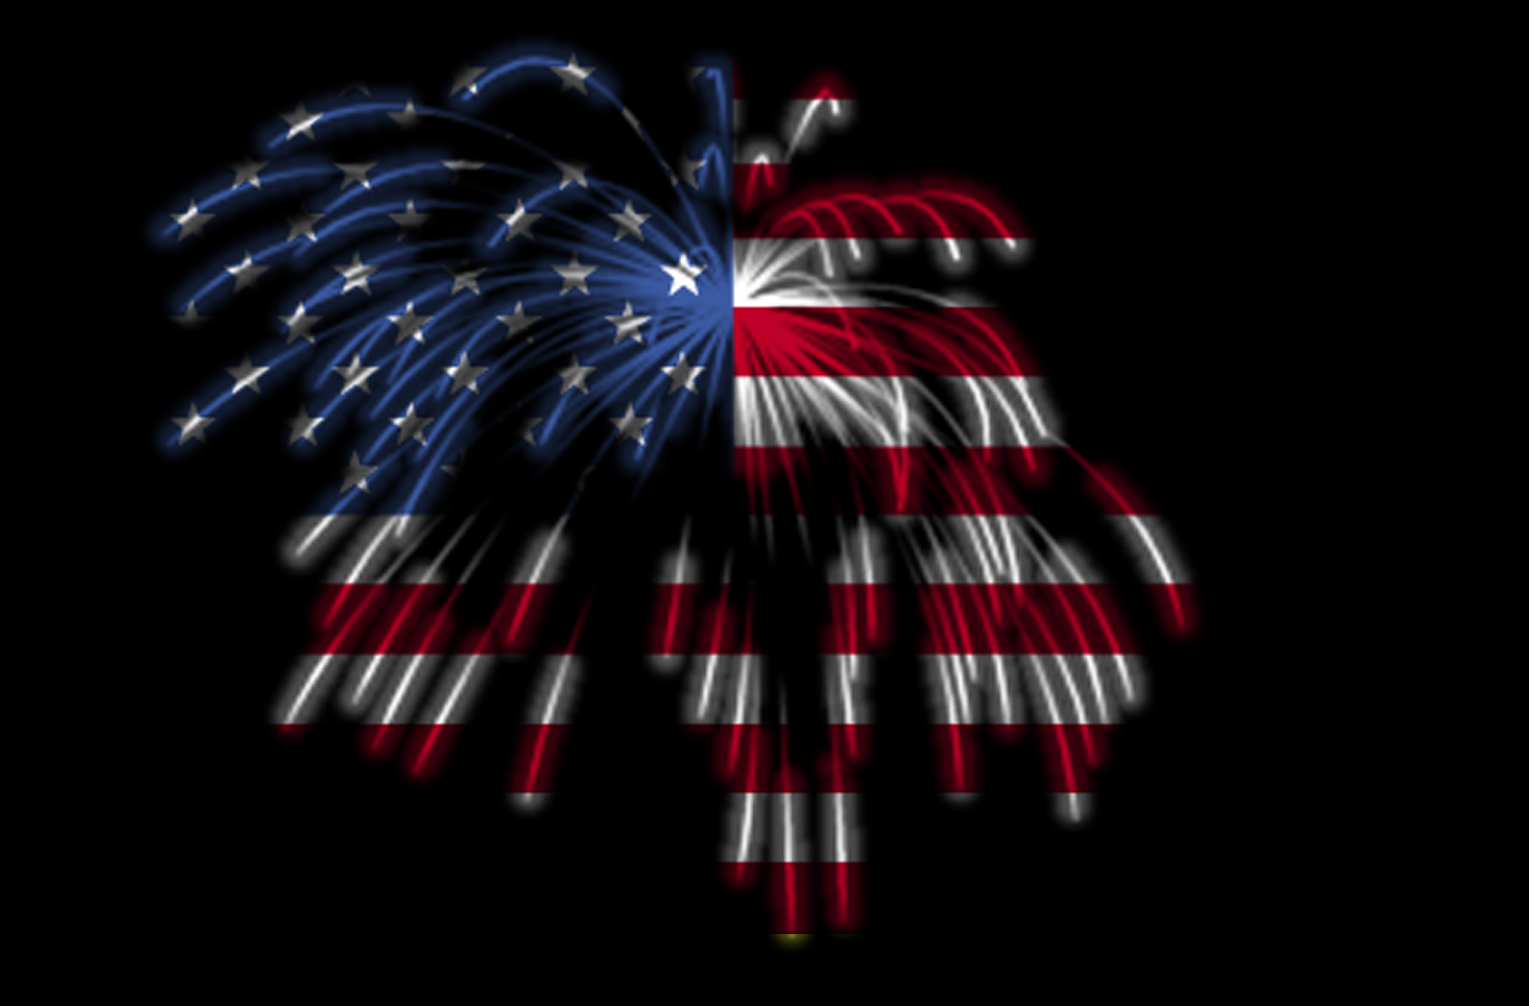 4th Of July Fireworks Wallpaper